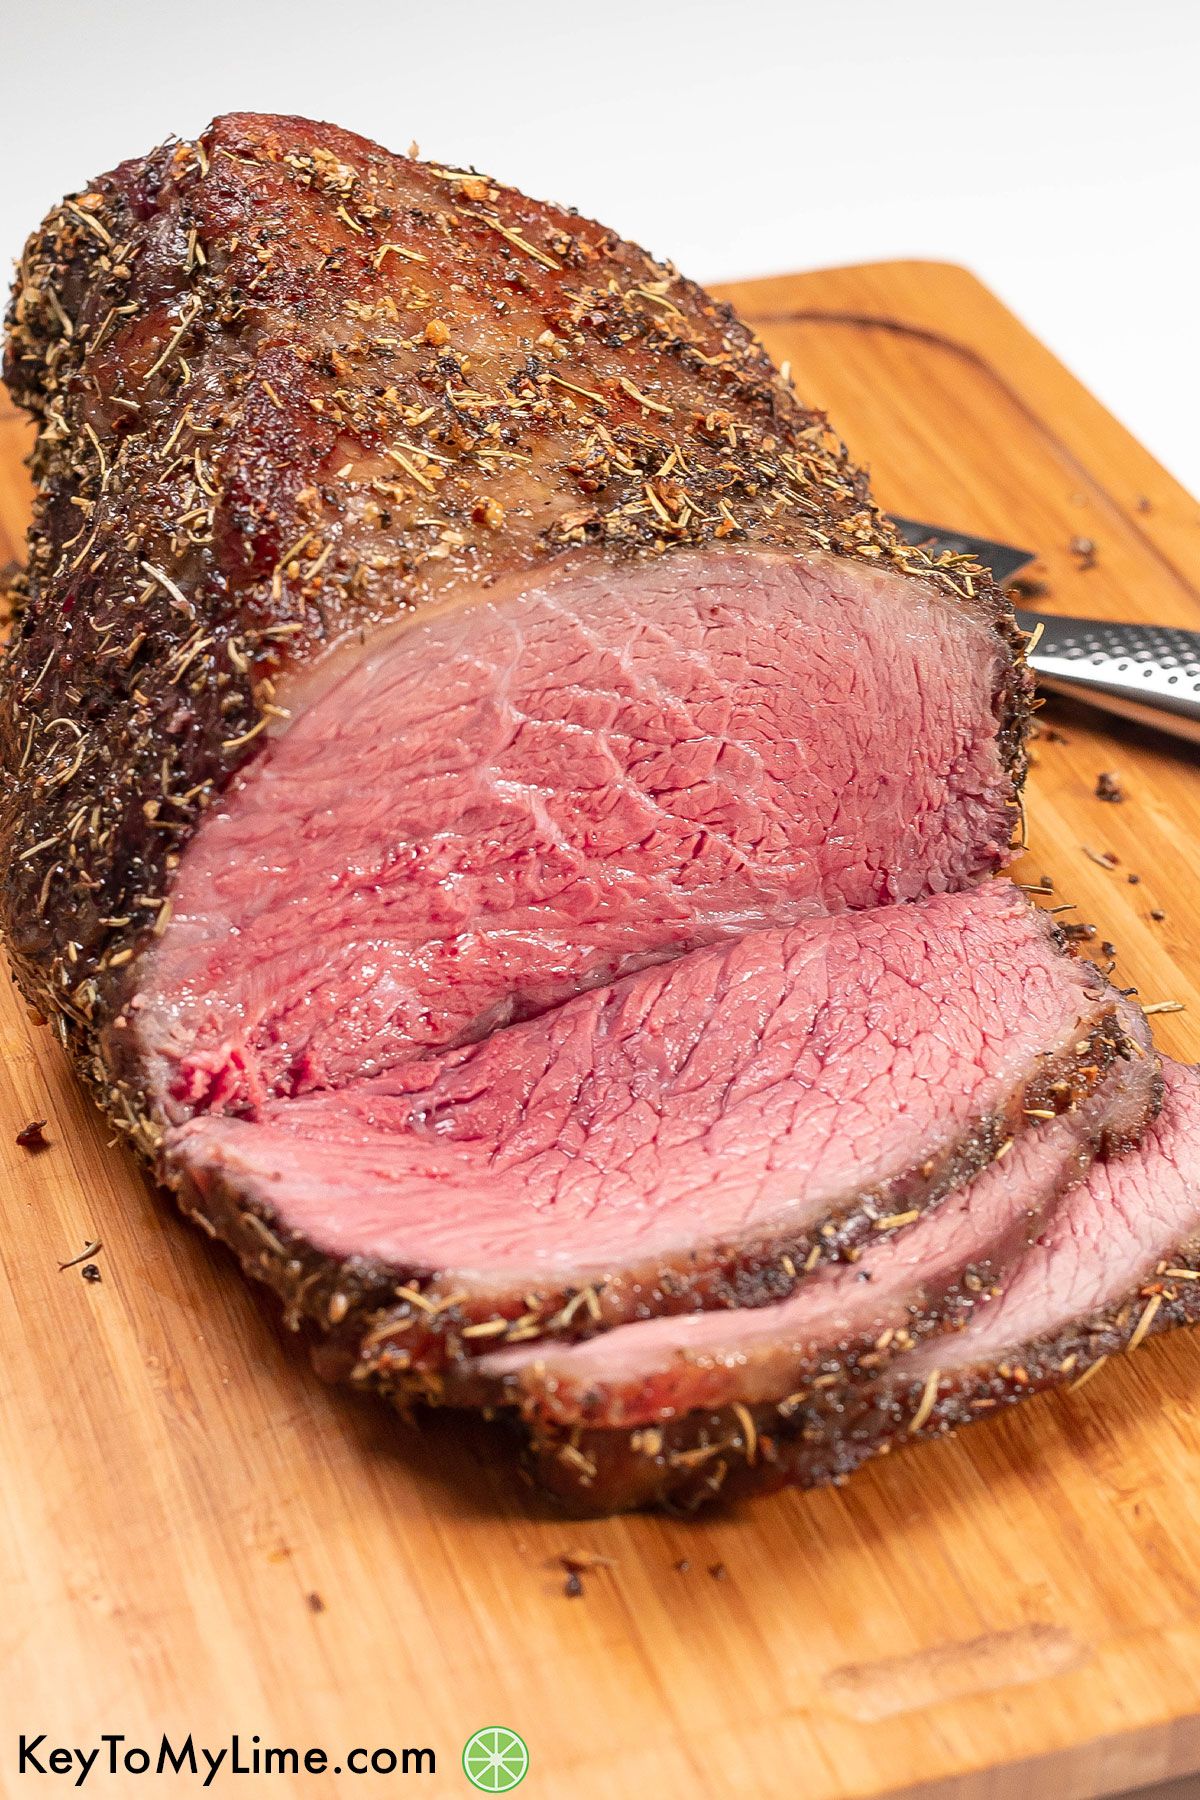 A beautiful perfectly cooked roast showing the inside texture.